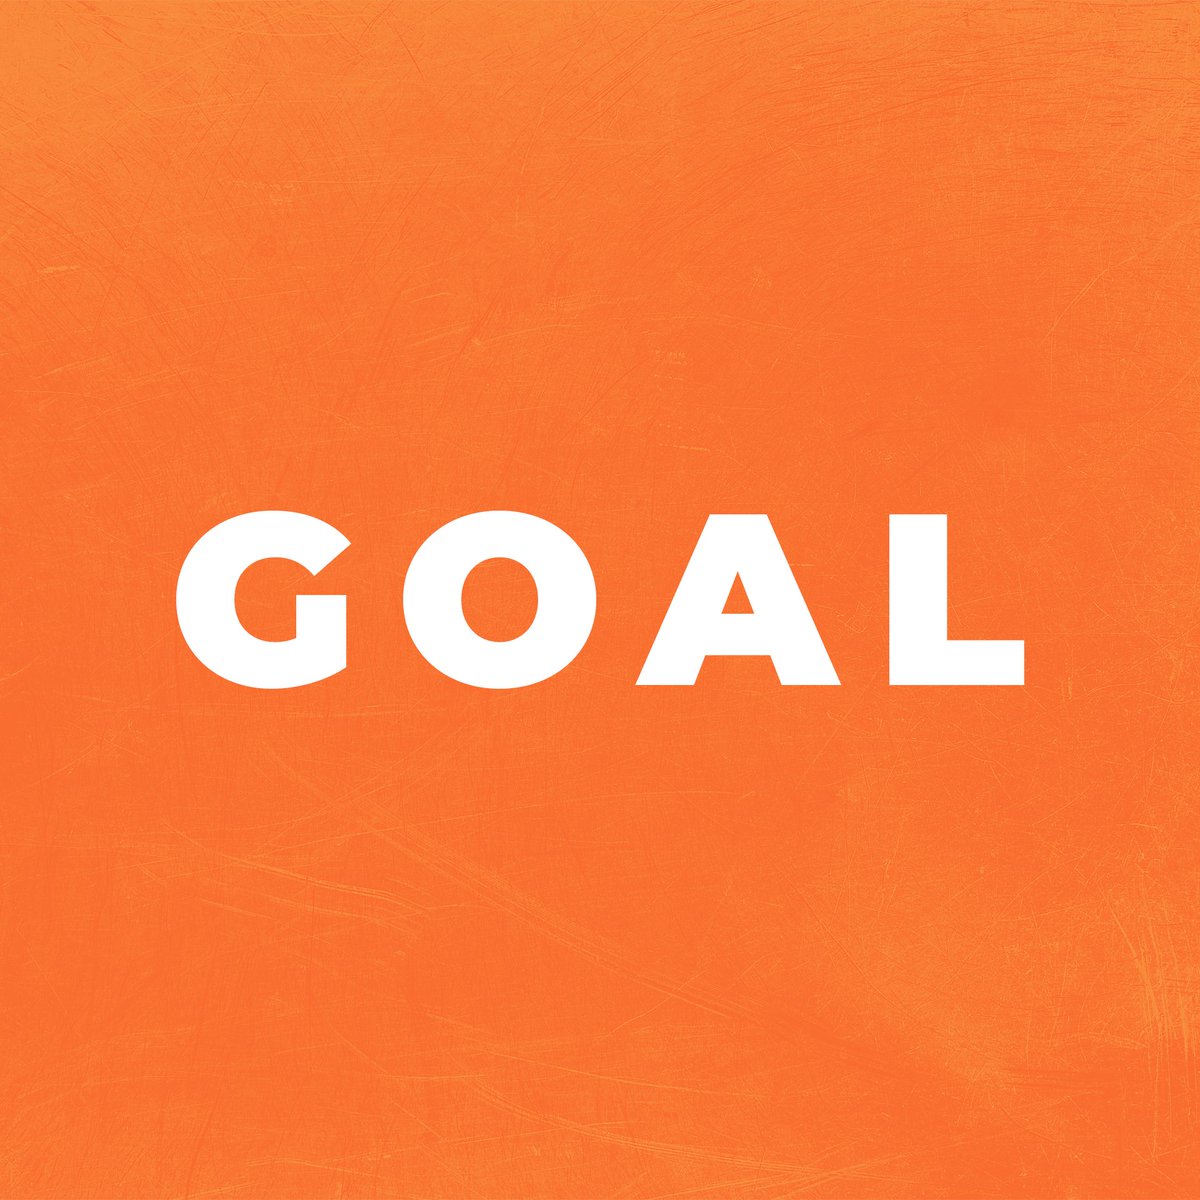 2' - WHAT A START!!!! Lennon Scholes heads in from a Charlie Cox delivery to give Pool an early lead. 🍊 #UTMP | 0-1